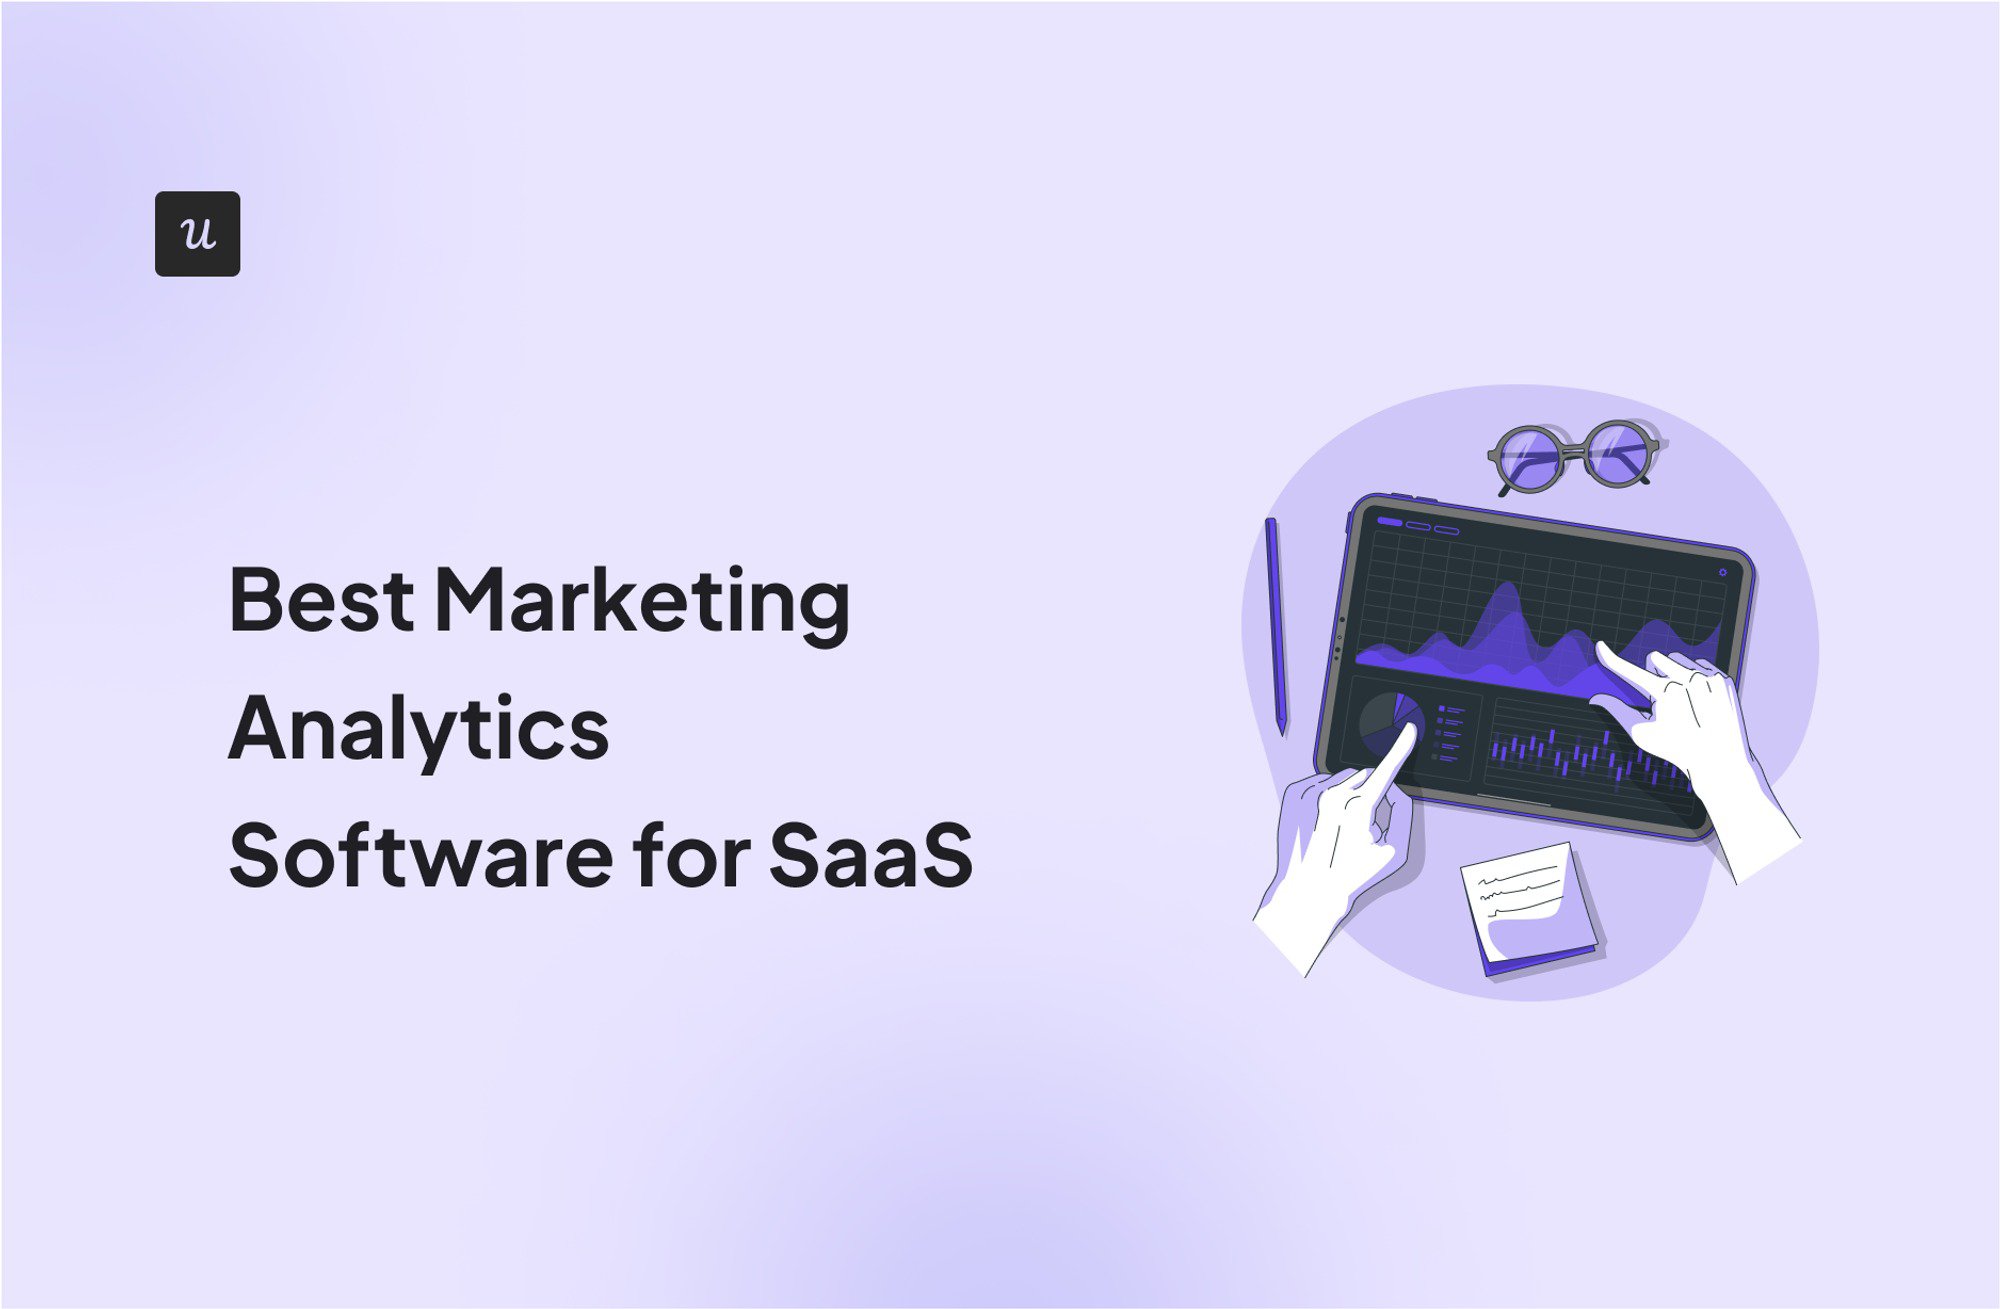 Best Marketing Analytics Software for SaaS cover